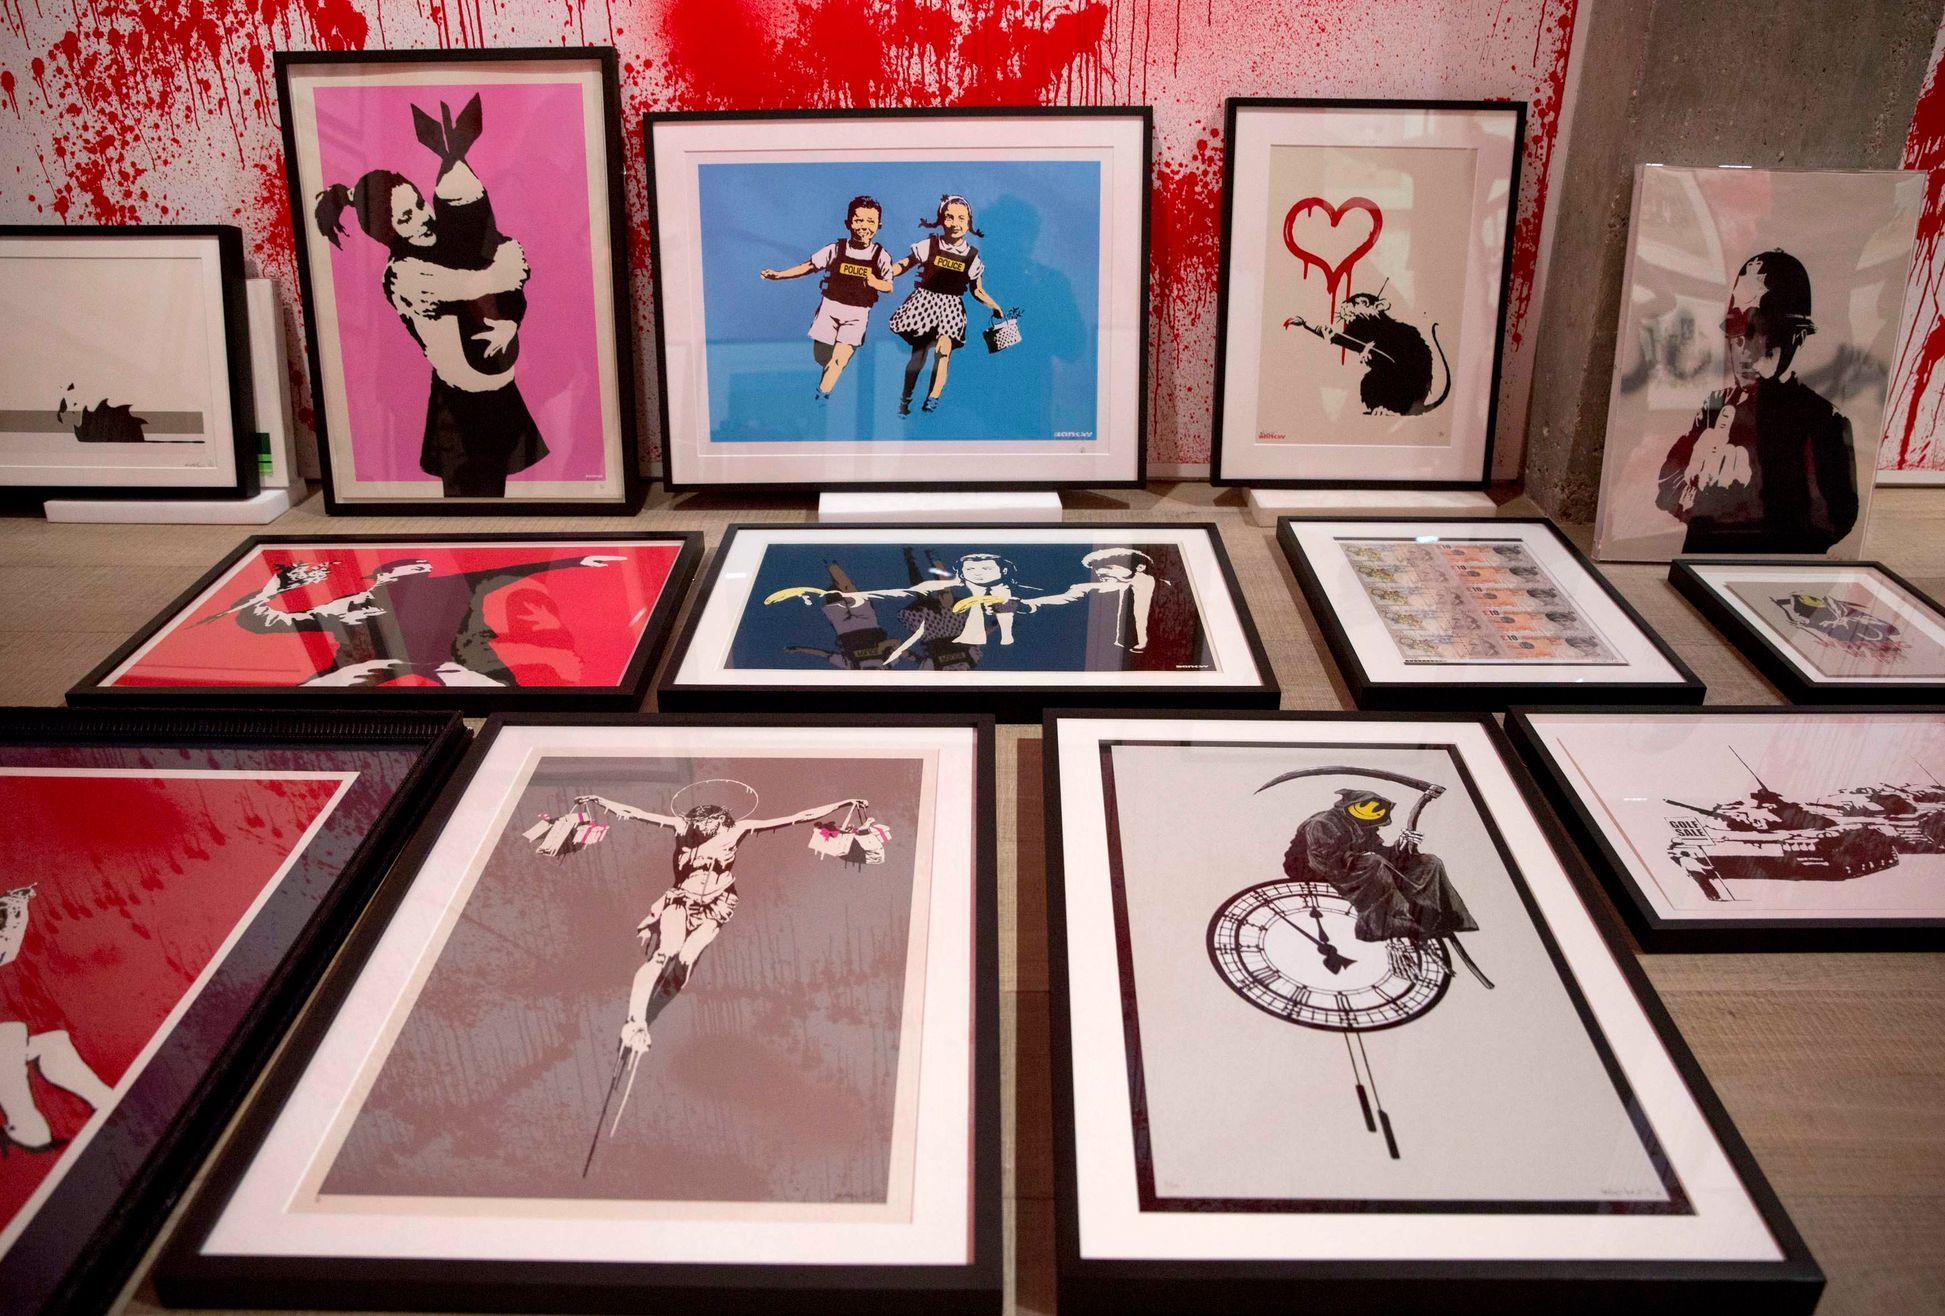 Art pieces wait to be hung at the Banksy: The Unauthorised Retrospective exhibition at Sotheby's S2 Gallery in London